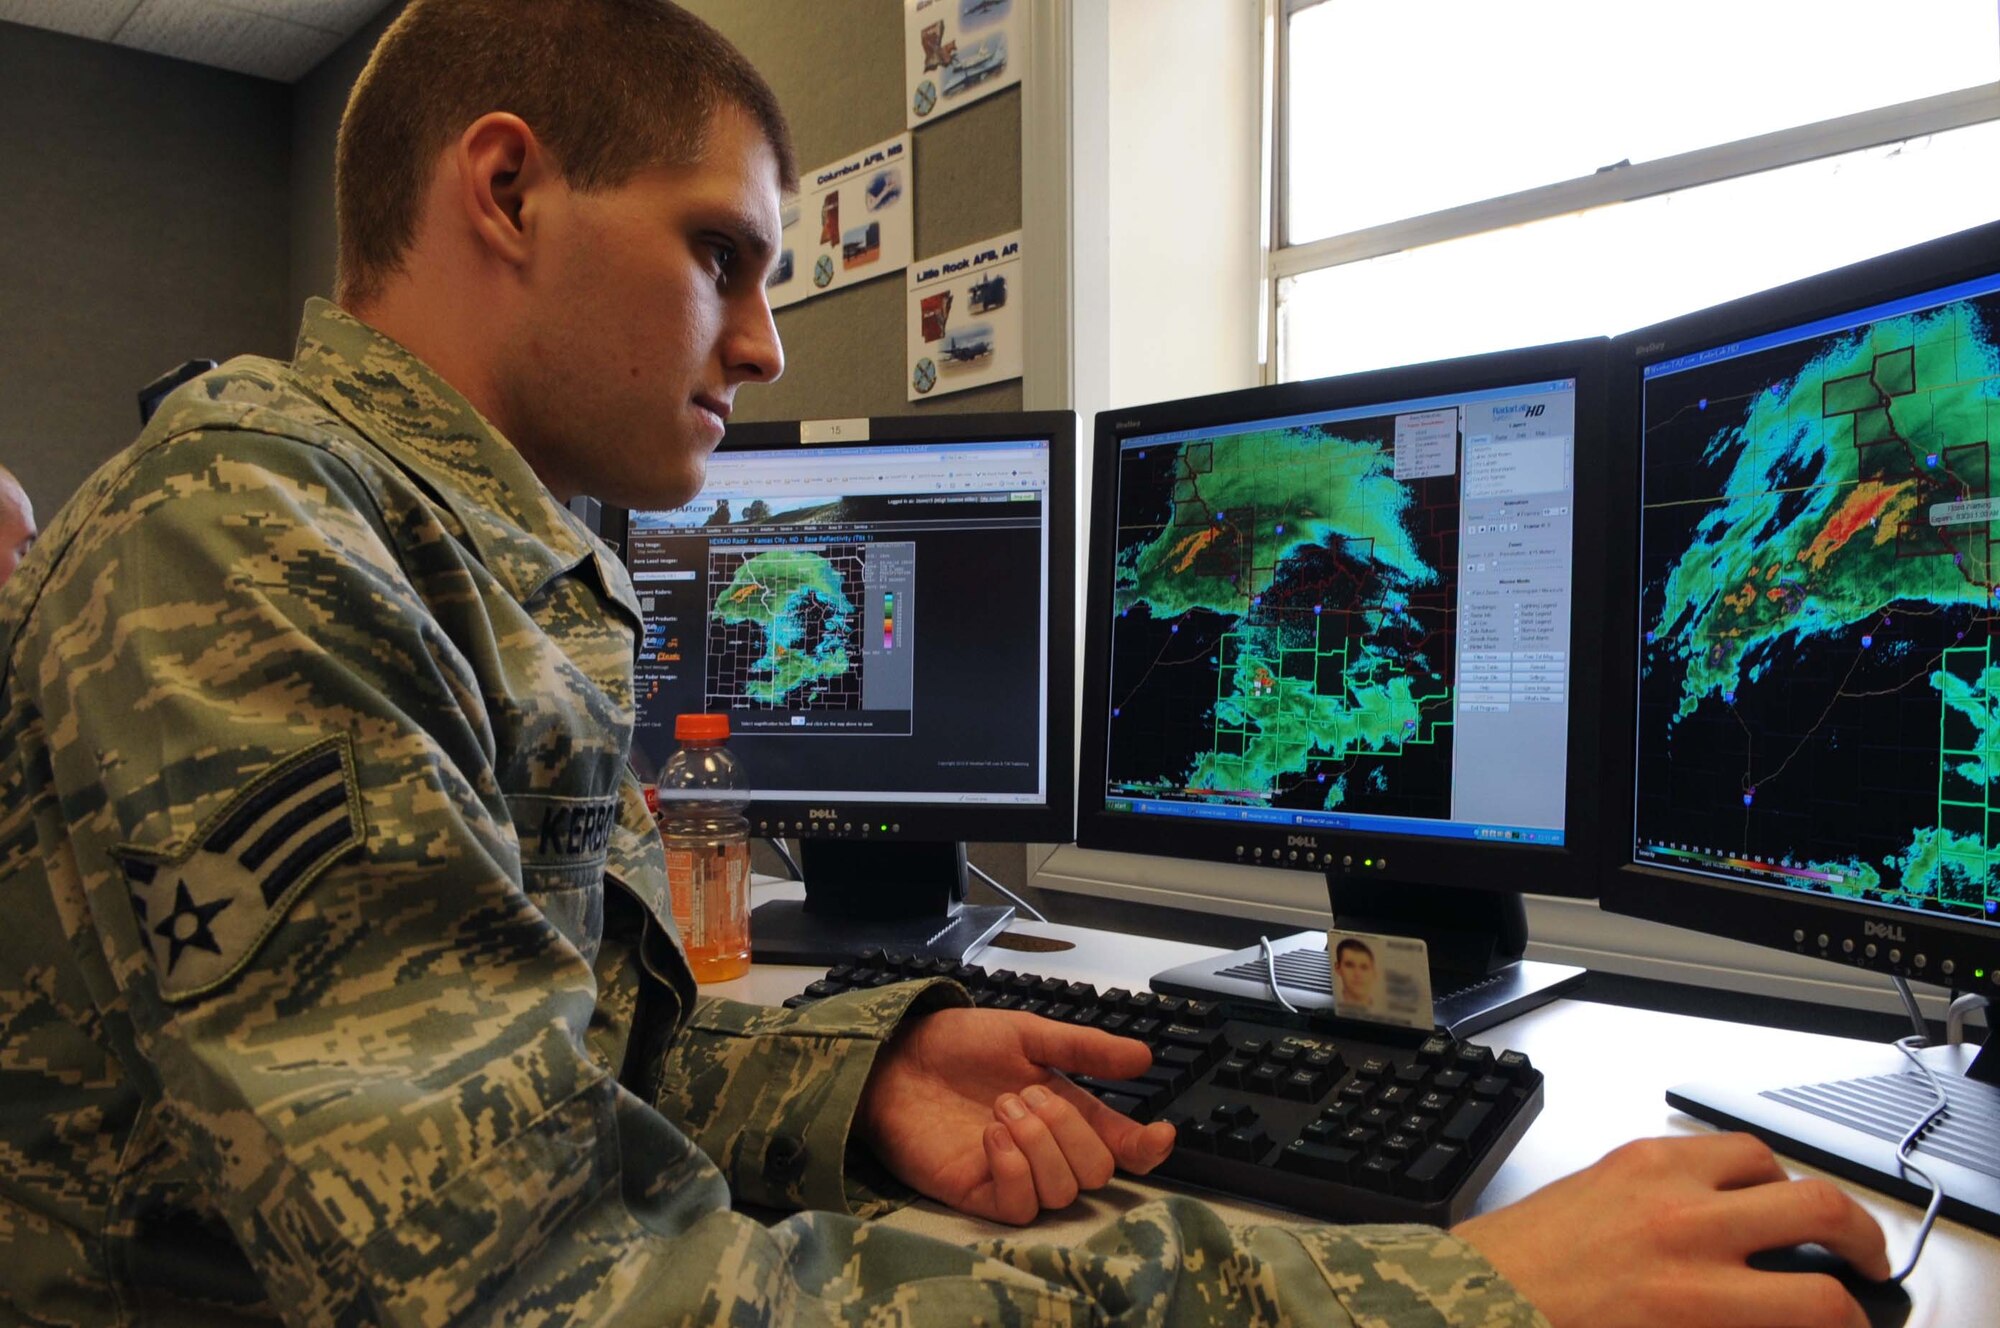 BARKSDALE AIR FORCE BASE, La. -- Senior Airman Christopher Kerbow, 26th Operational Weather Squadron weather forecaster, obverses a storm in his assigned region March 24. The 26th OWS is undergoing upgrades to equipment and software to enhance weather forecasting and storm reporting. (U.S. Air Force photo by Airman 1st Class Joseph Boals)